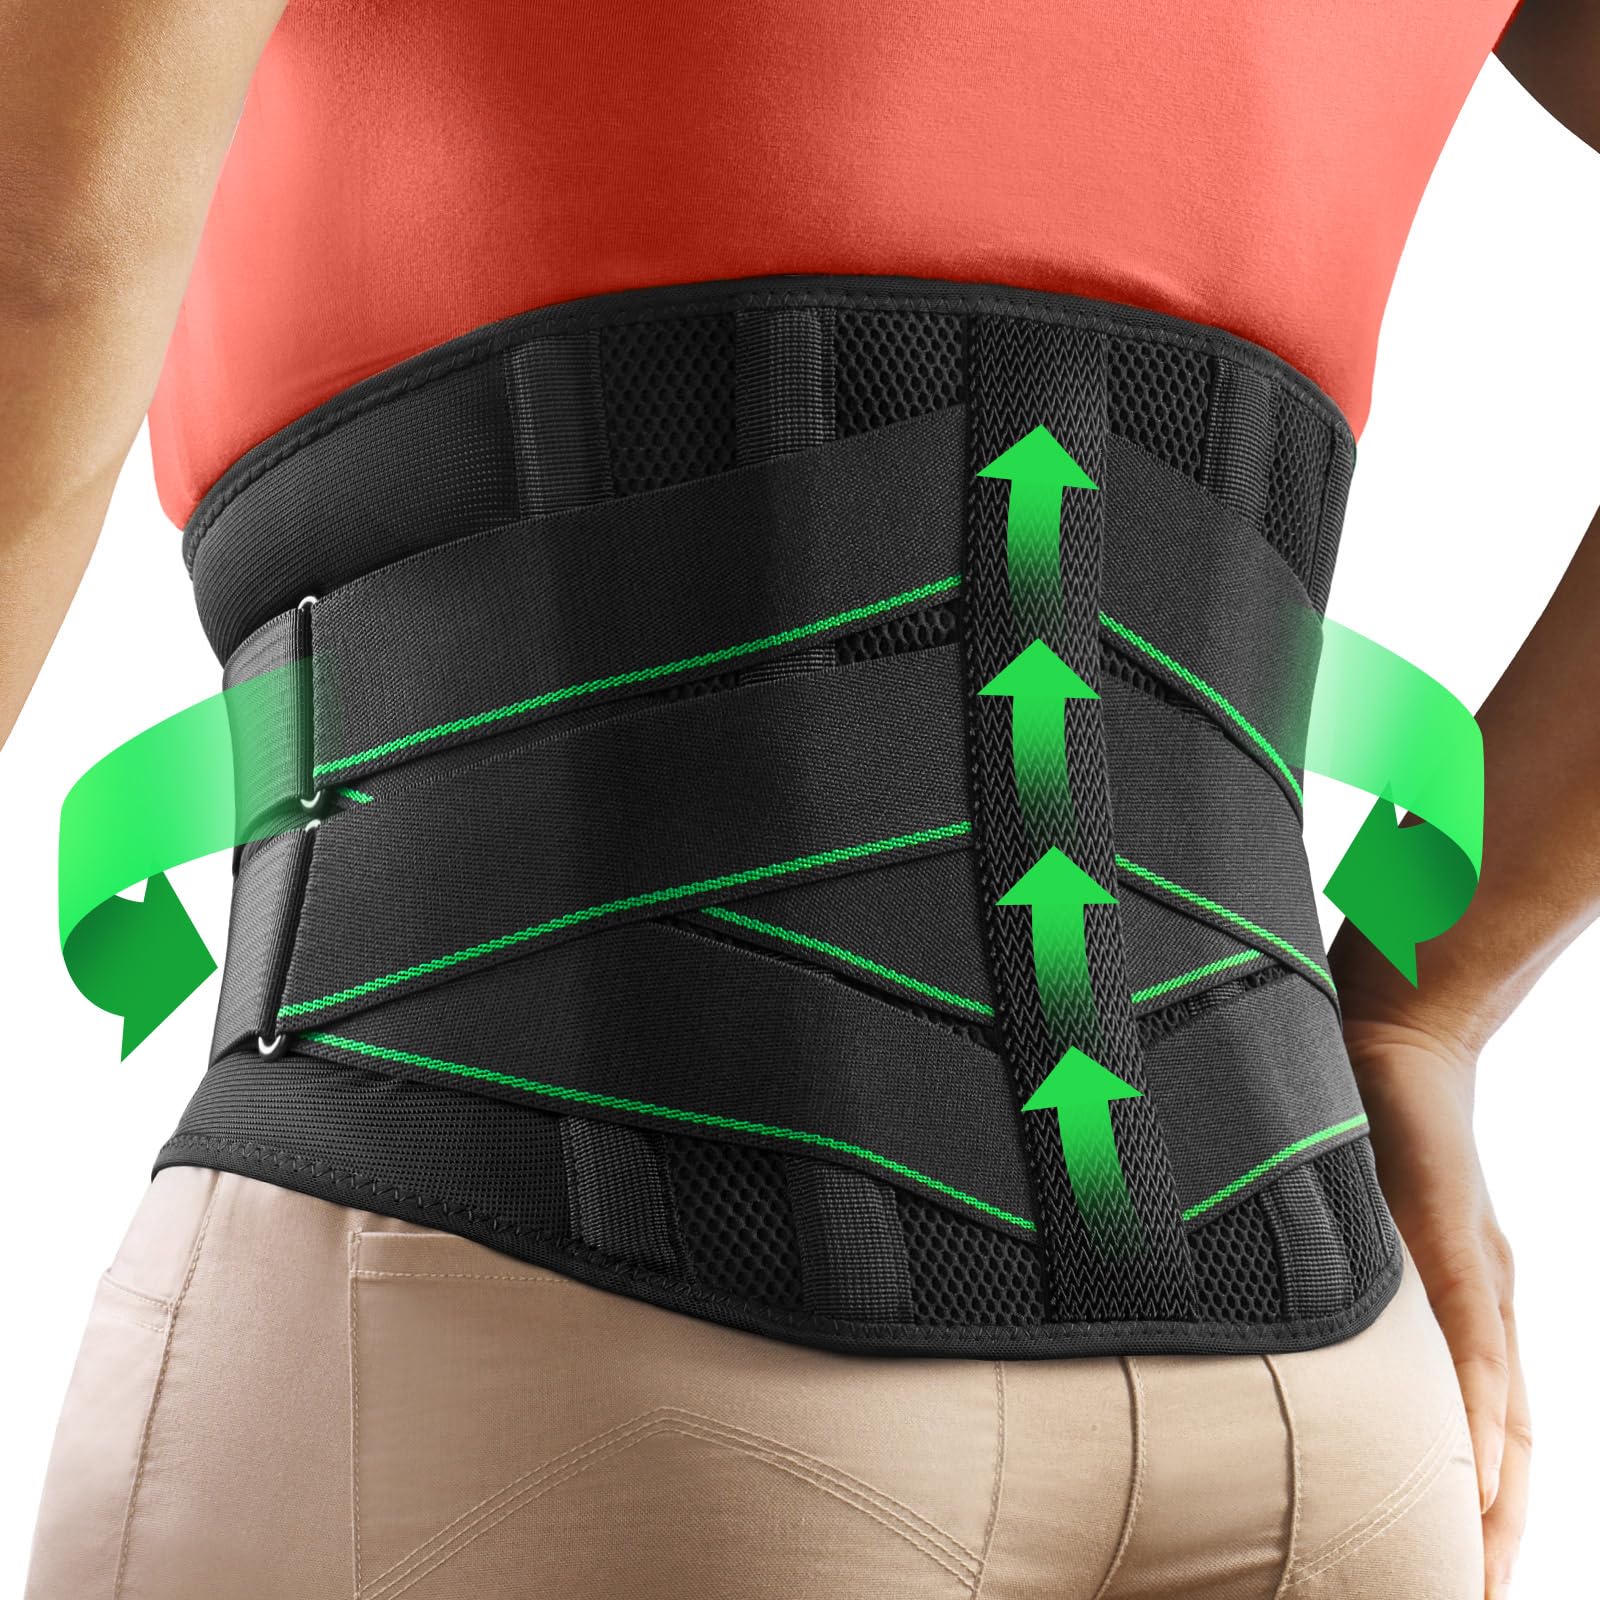 Freetoo Back Support Brace With 6 Stays M for sale online